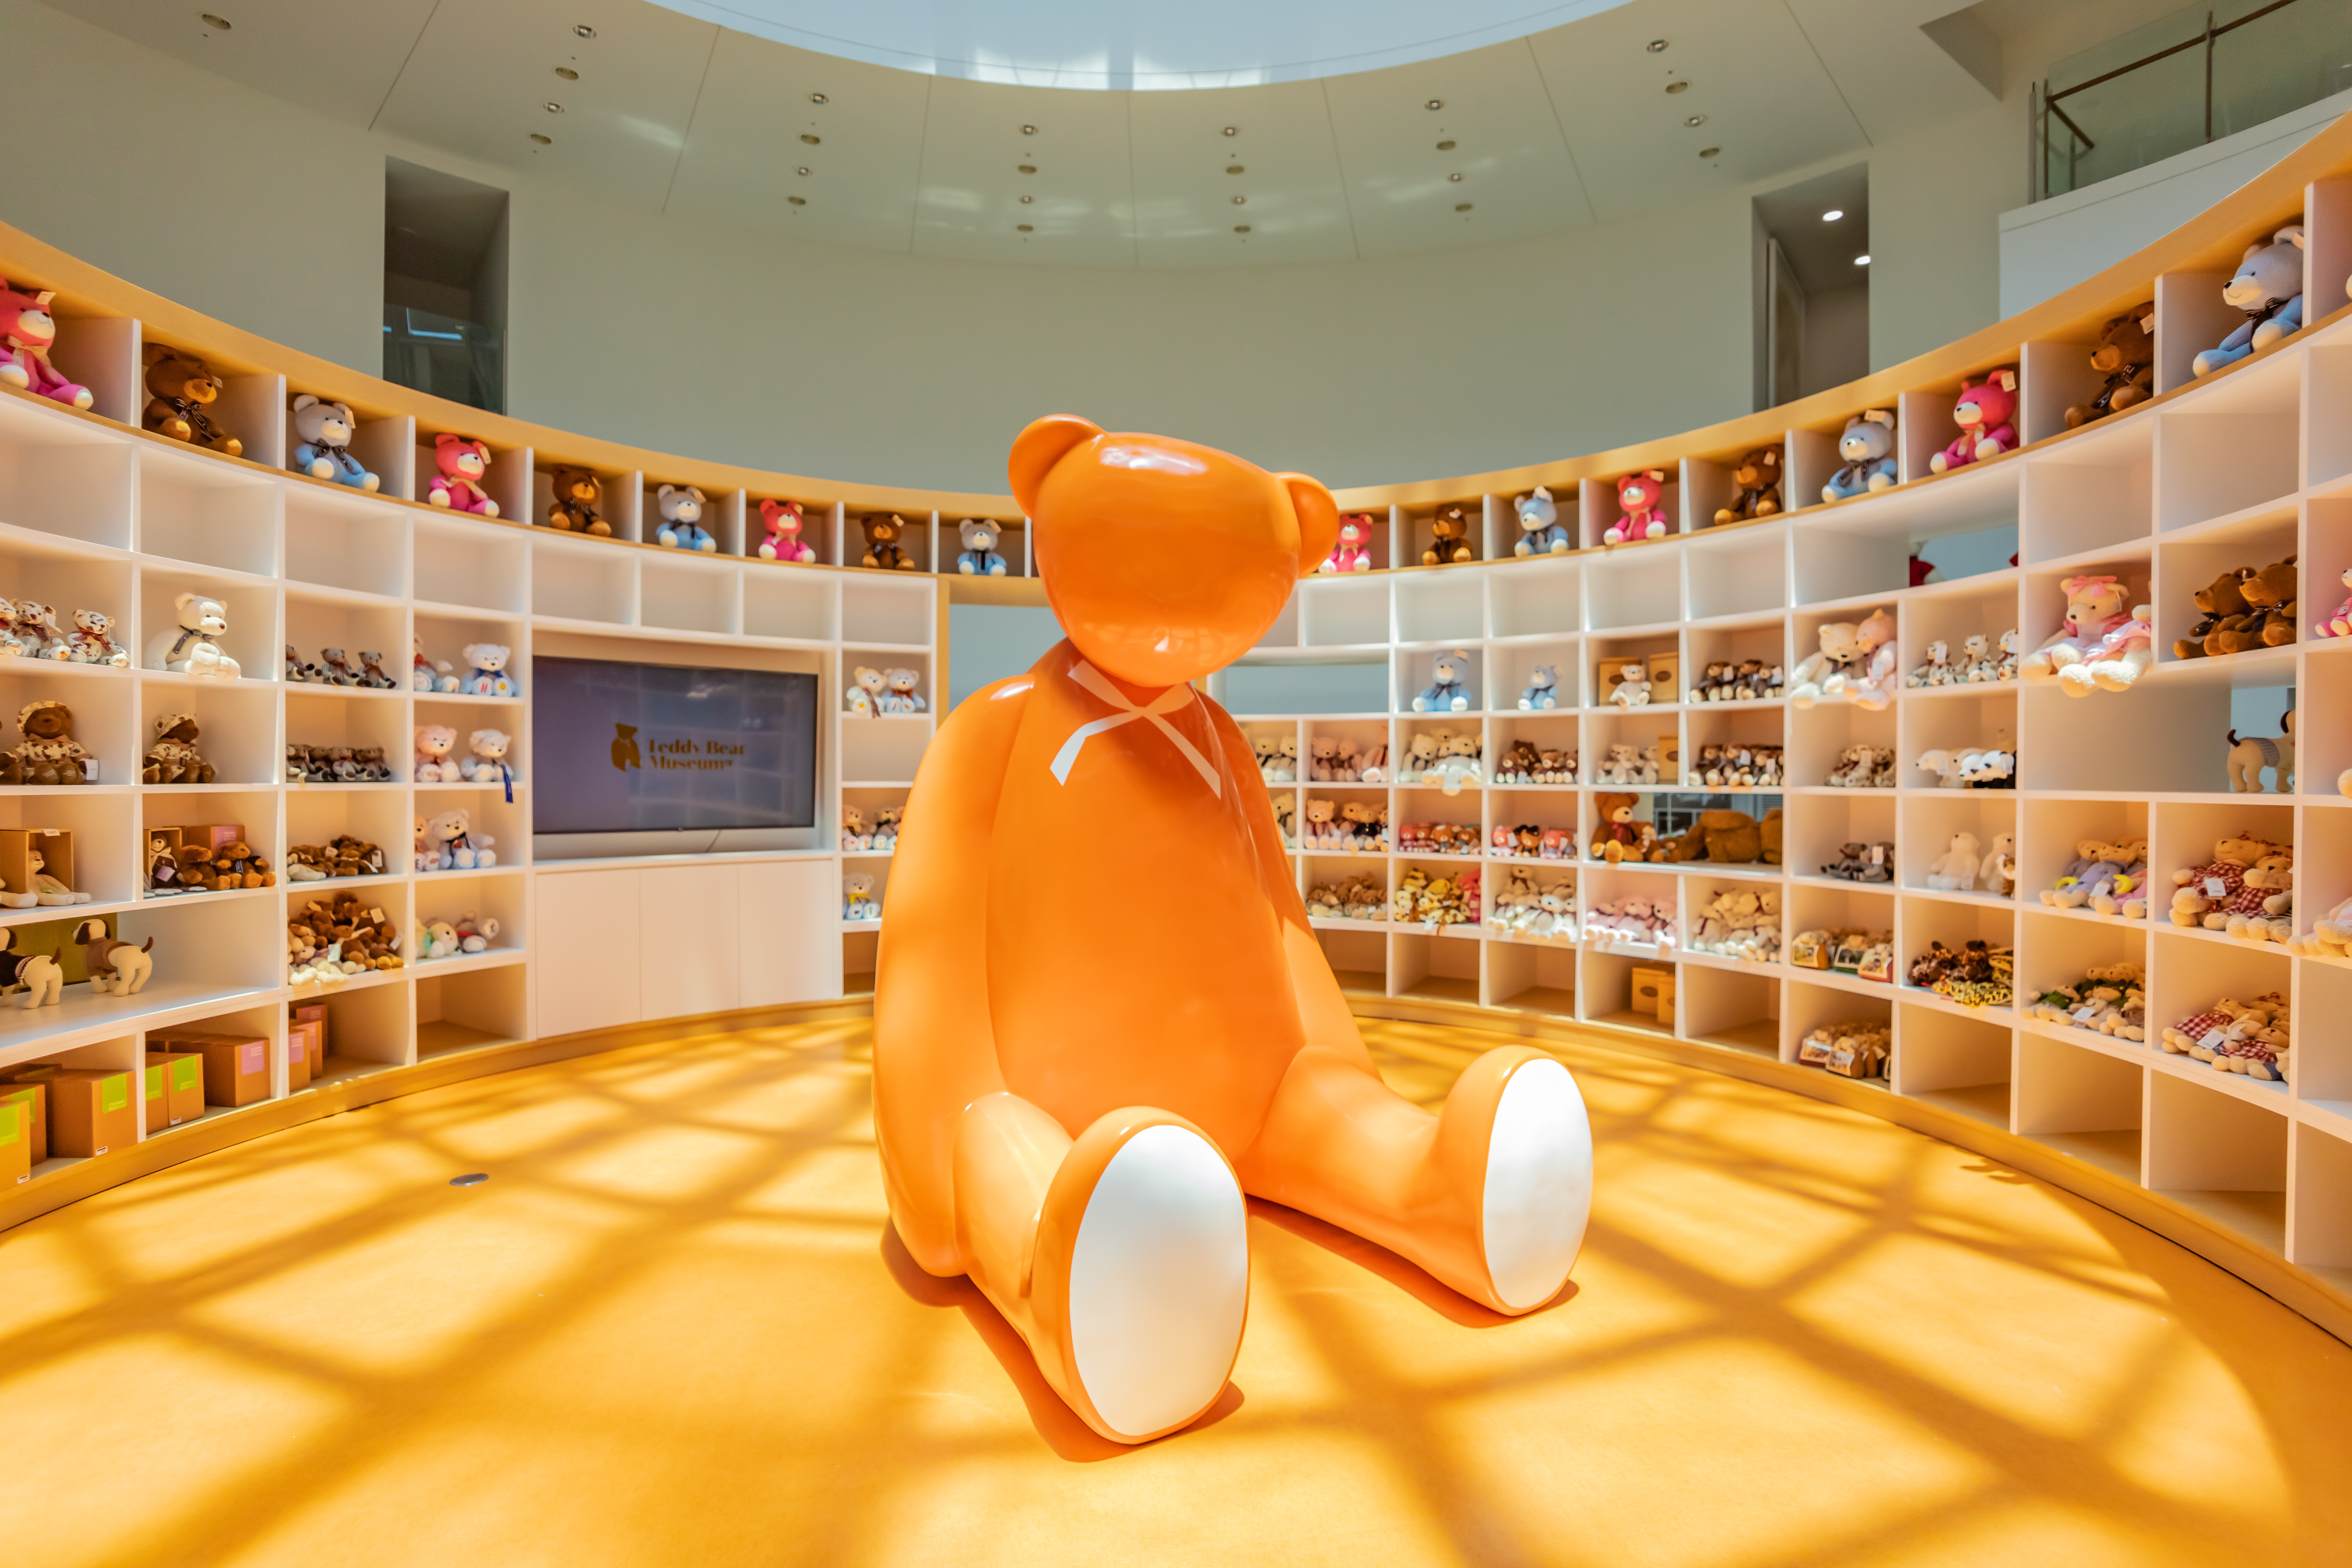 Latest travel itineraries for Teddy Bear Museum in October (updated in  2023), Teddy Bear Museum reviews, Teddy Bear Museum address and opening  hours, popular attractions, hotels, and restaurants near Teddy Bear Museum 